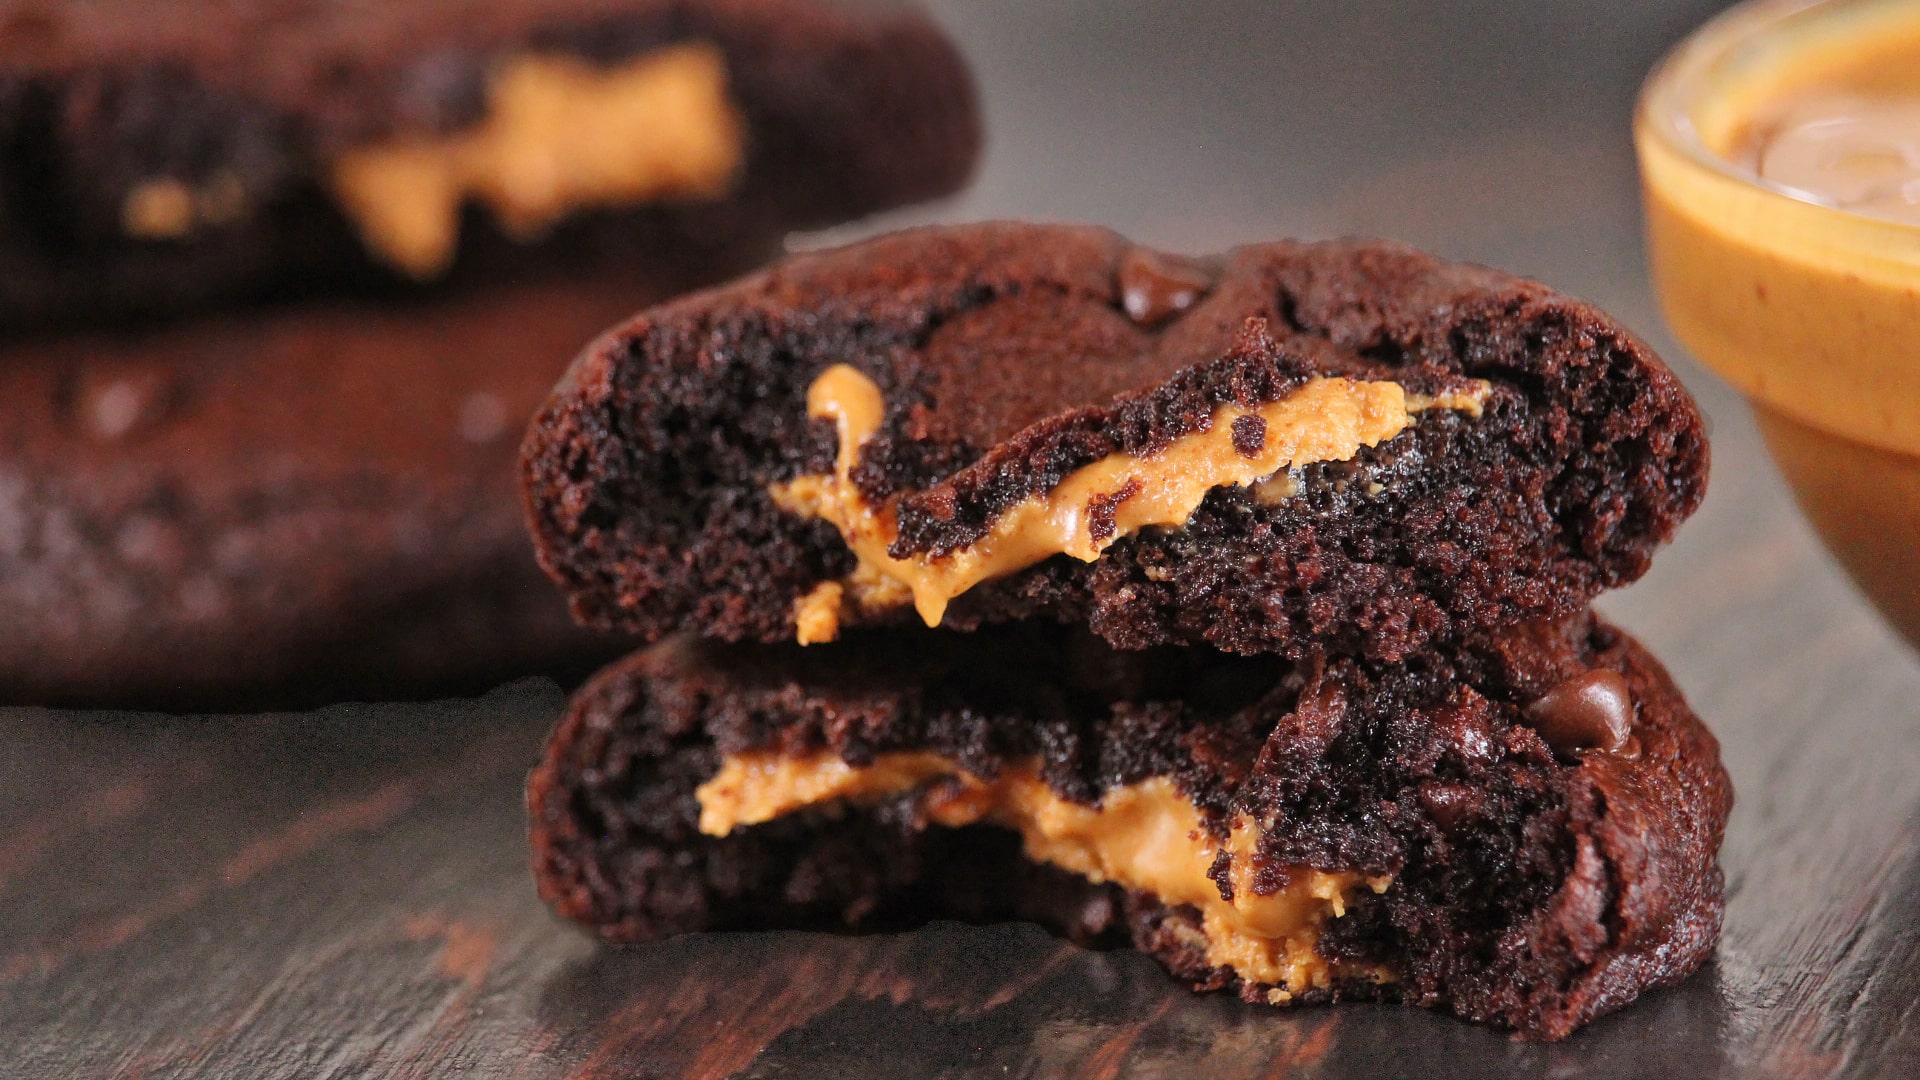 PEANUT BUTTER CHOCOLATE COOKIES